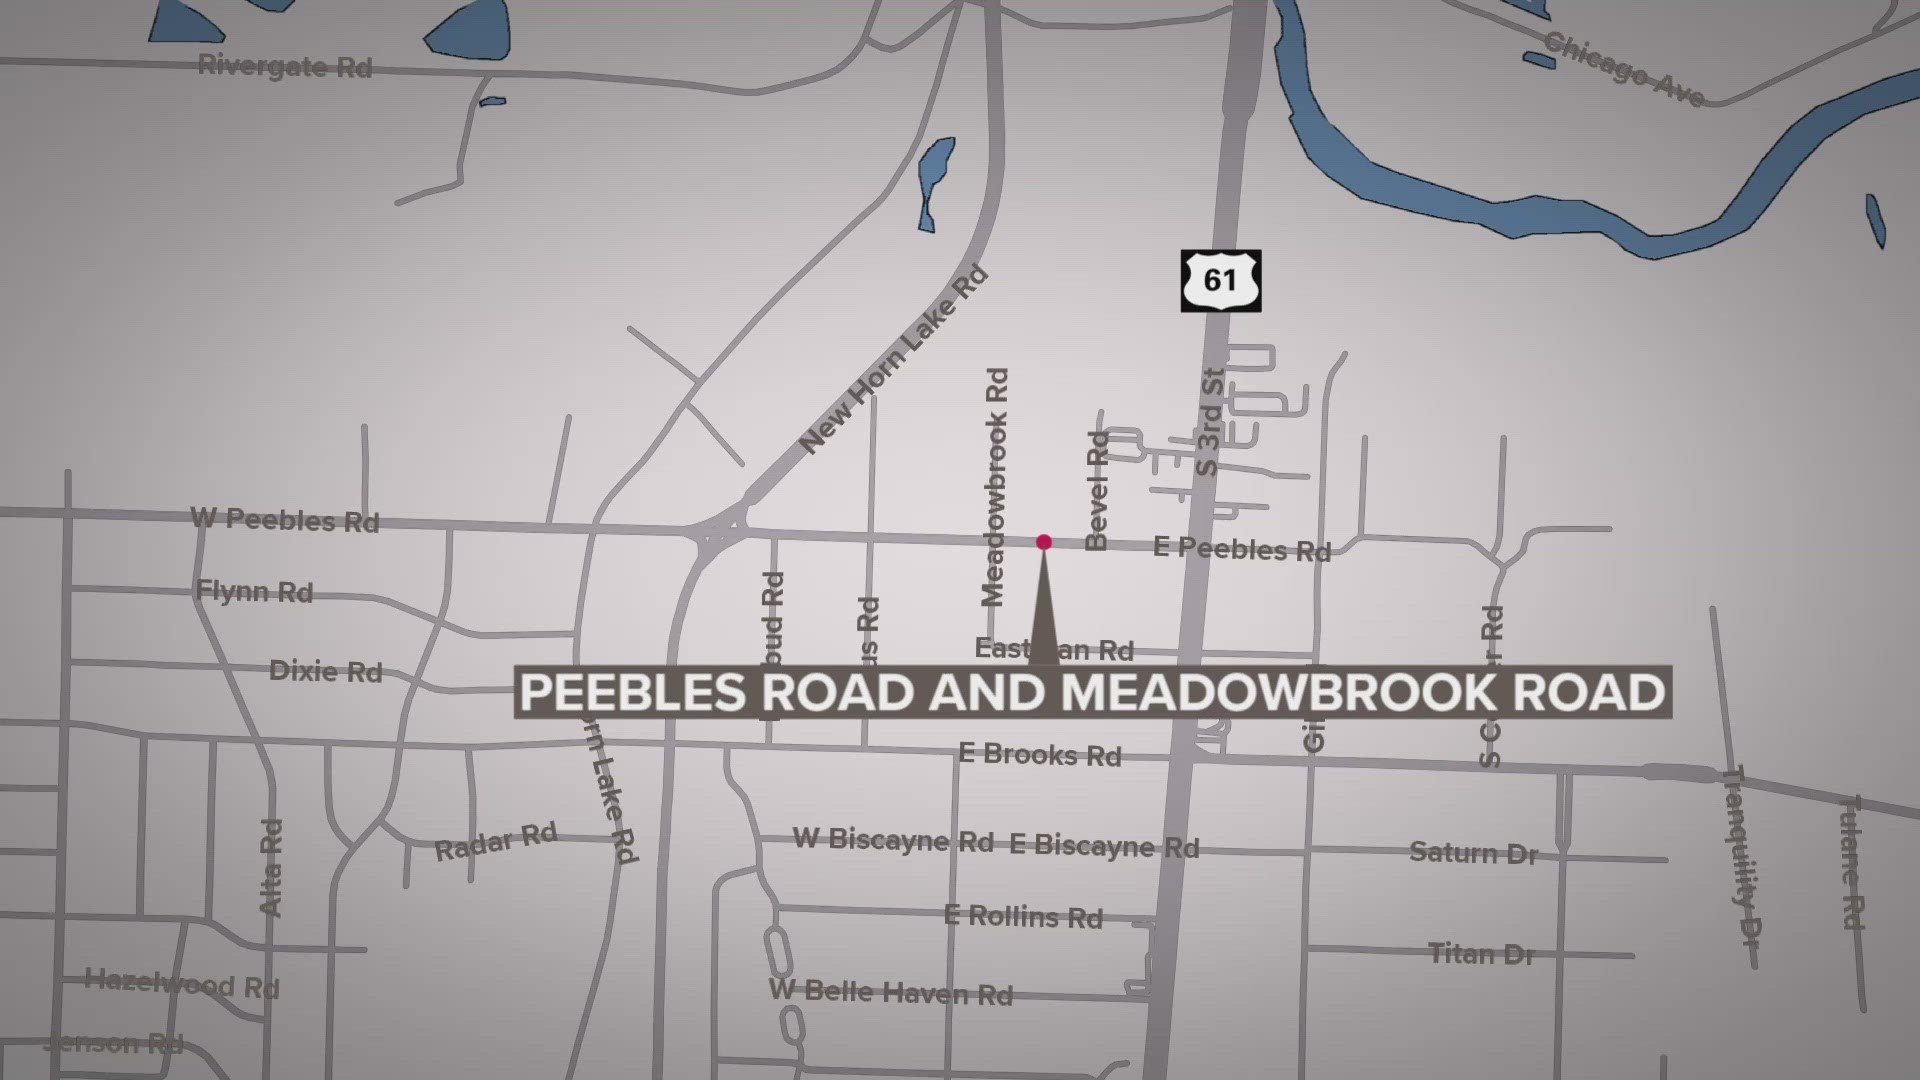 Officers said they responded to a shooting at the intersection of Peebles and Meadowbrook Rd. Sunday, April 23 at 7:54 p.m.